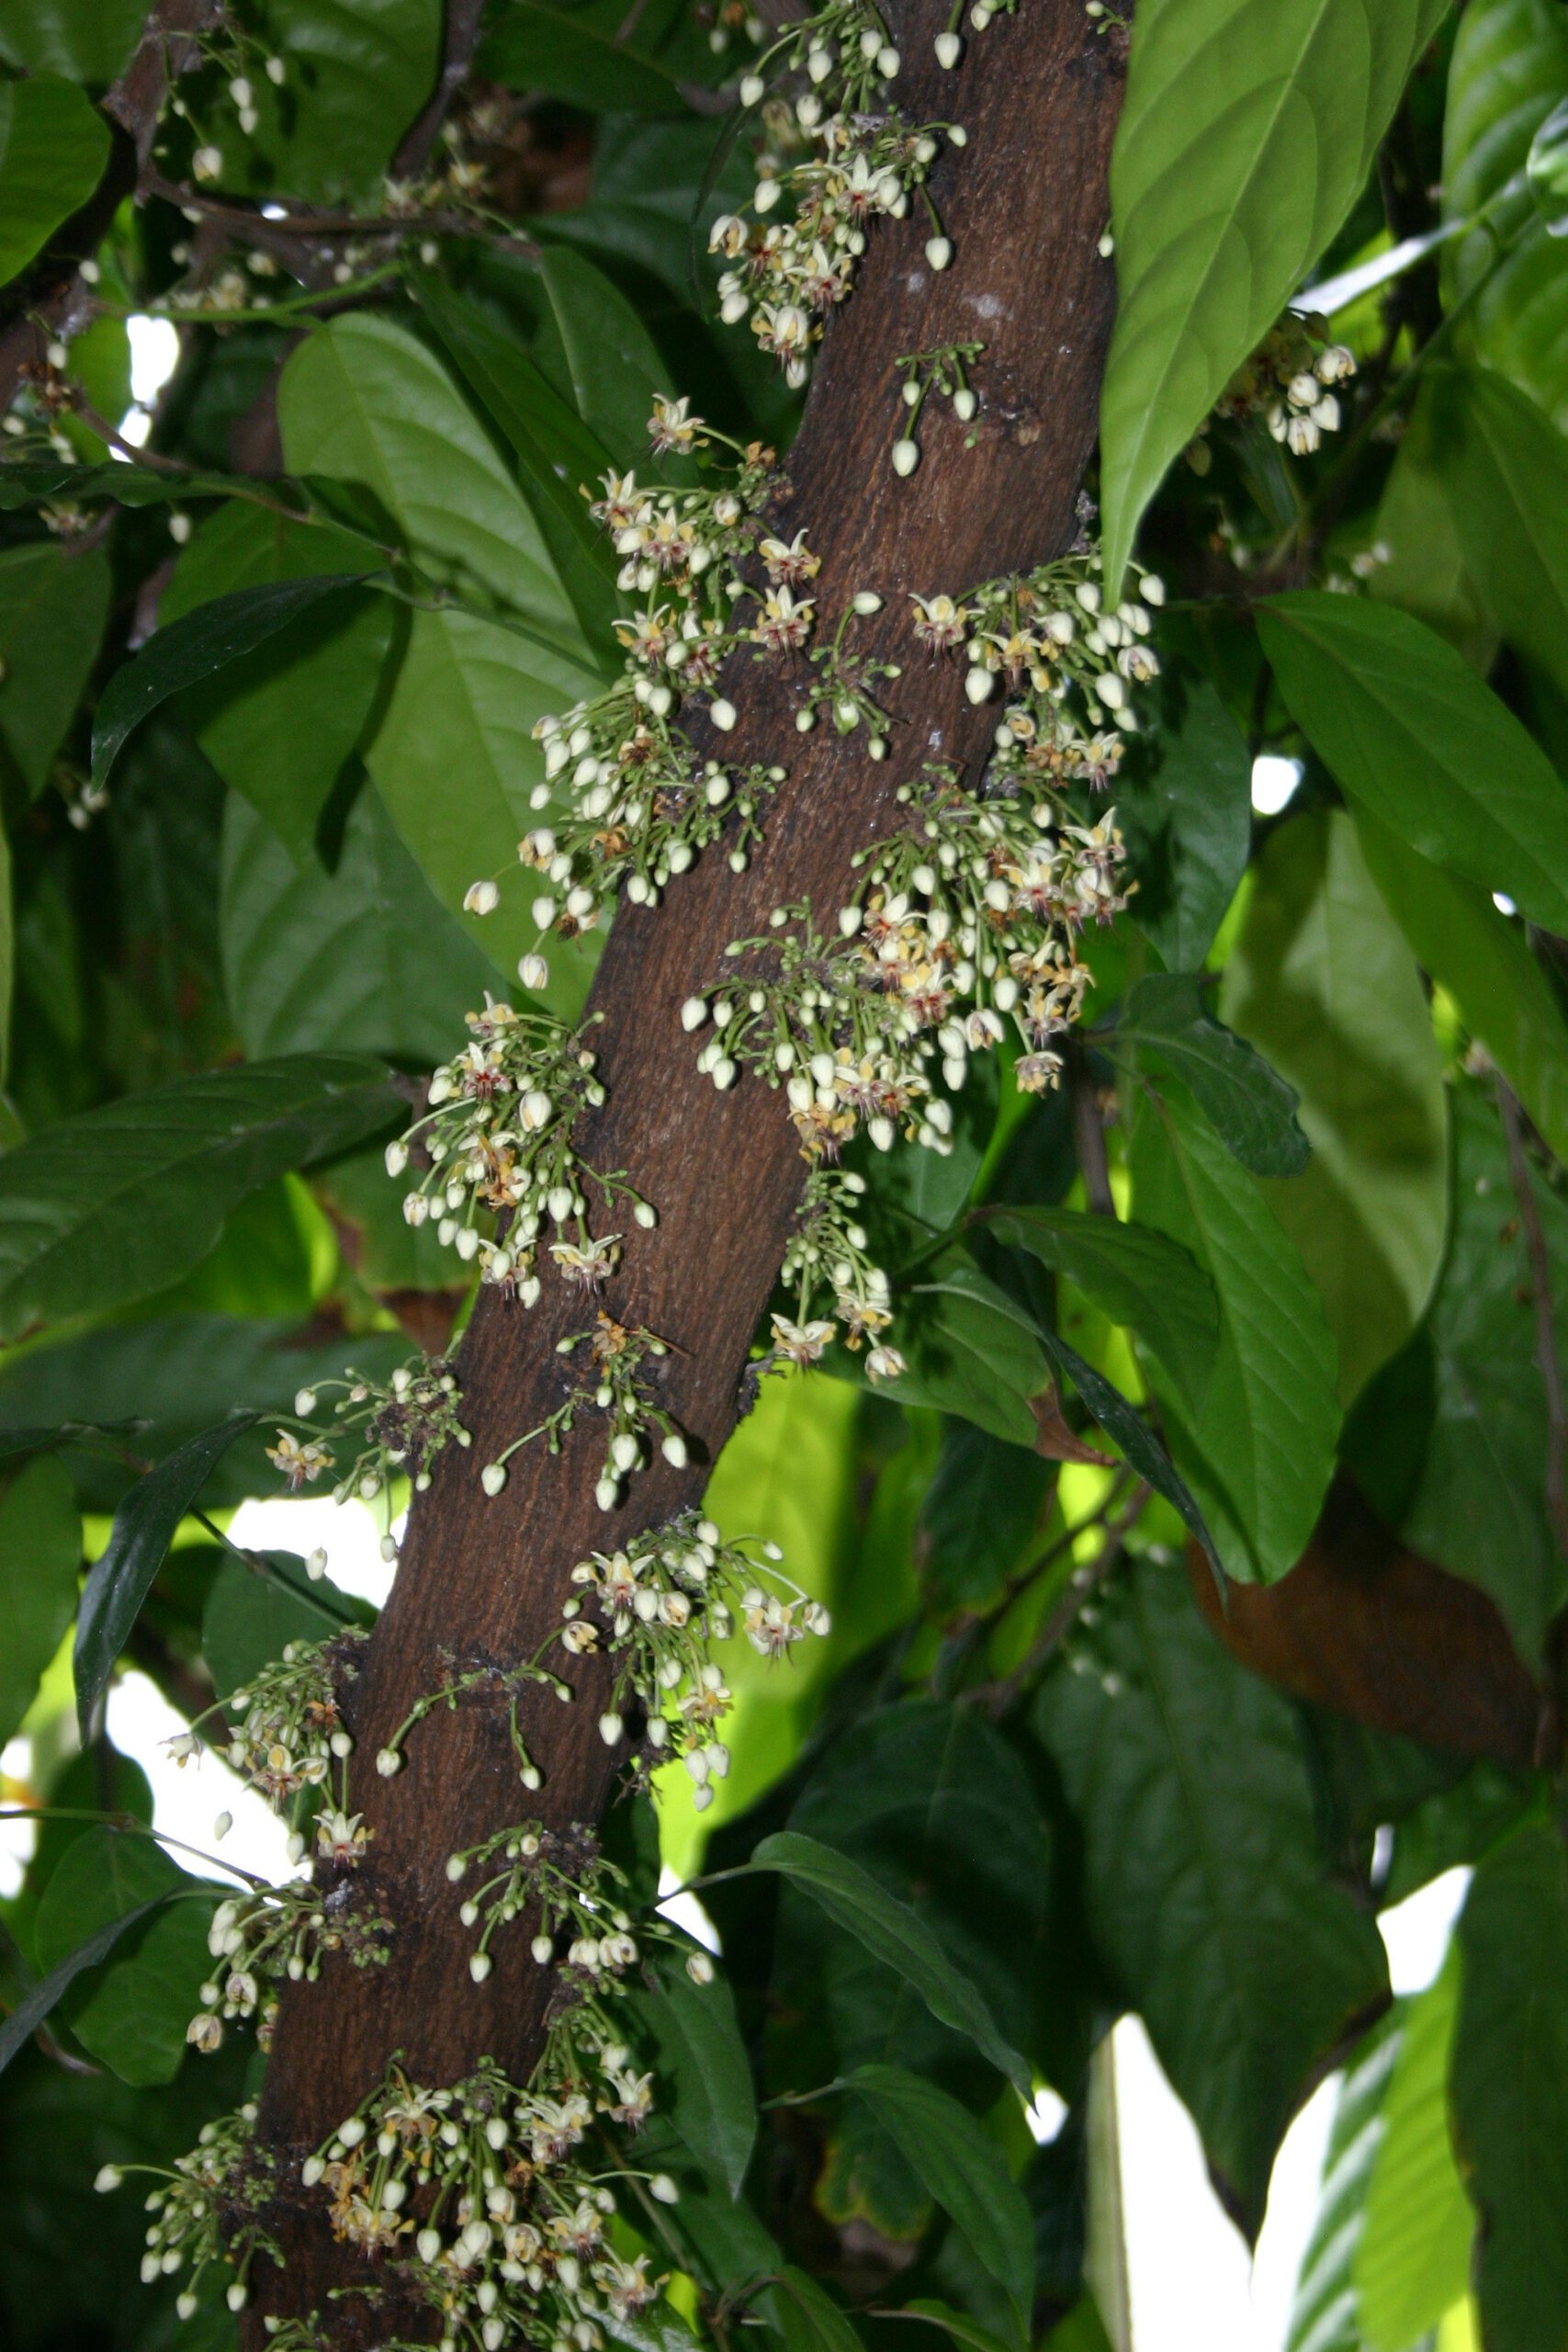 A dark brown branch covered in small white buds on little green stalks.